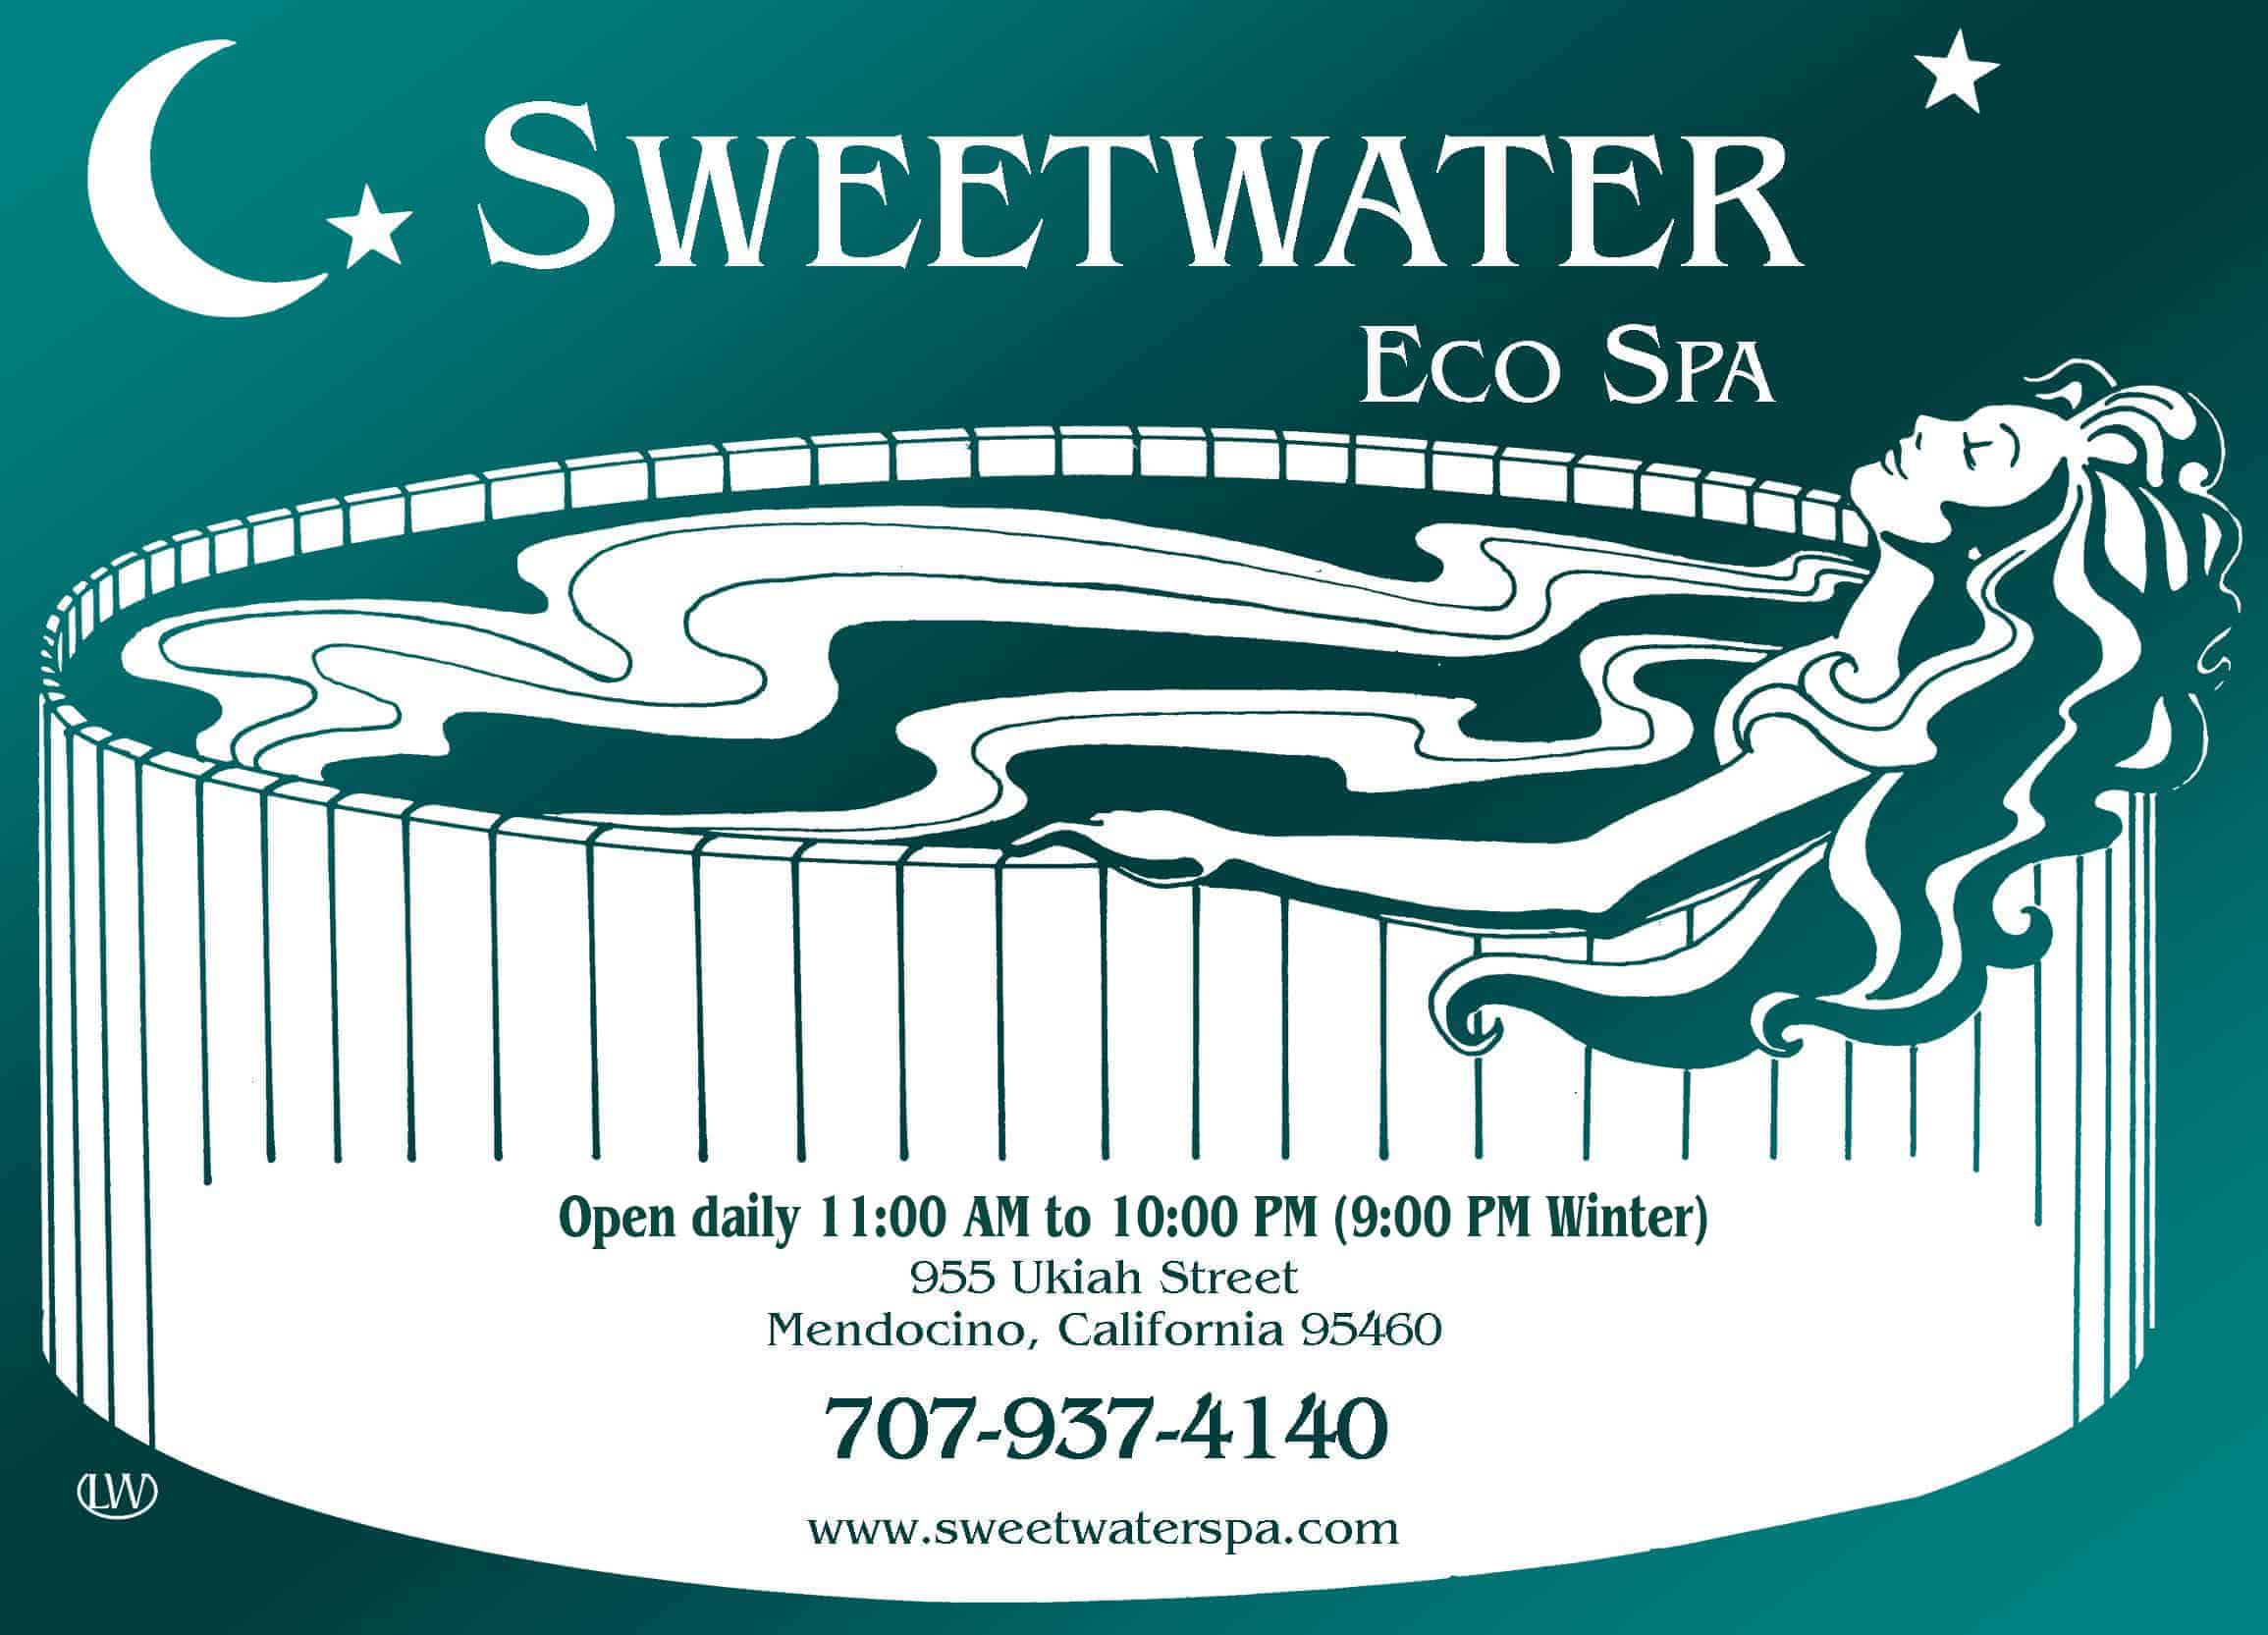 sweetwater eco spa hours